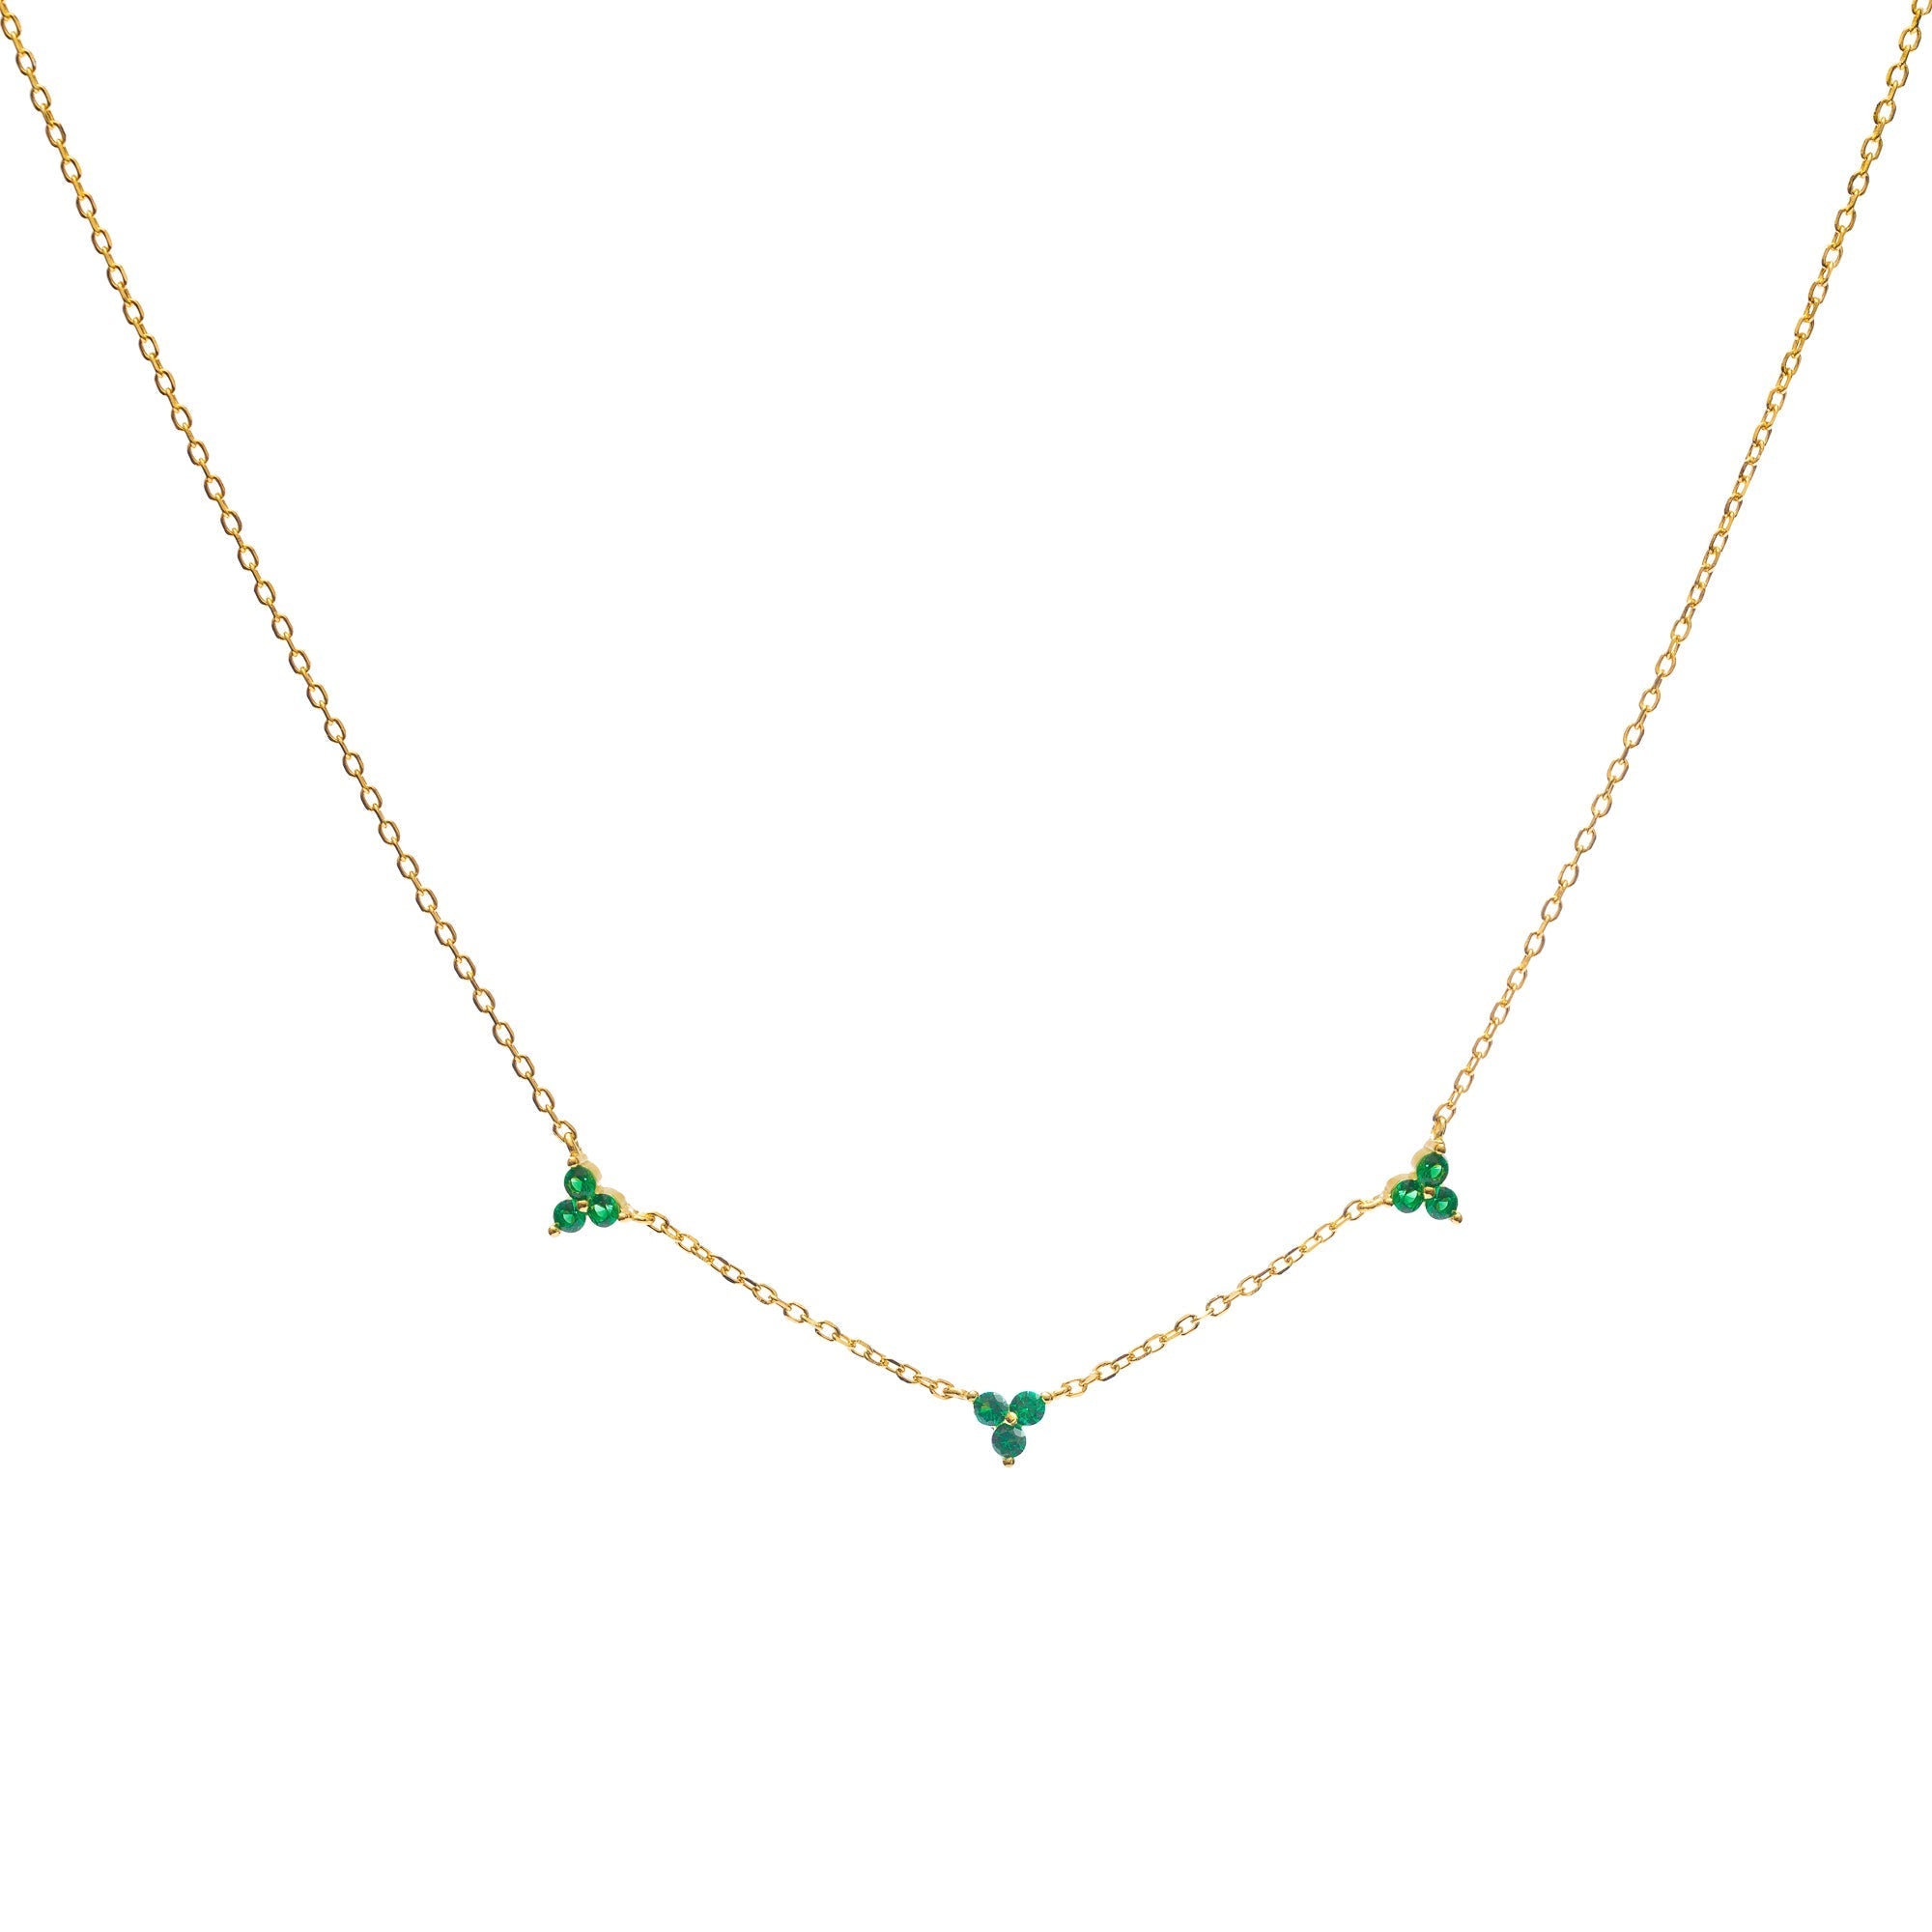 Duo Jewellery Necklaces Yellow Gold / Green Duo Three Stone Flower Necklace